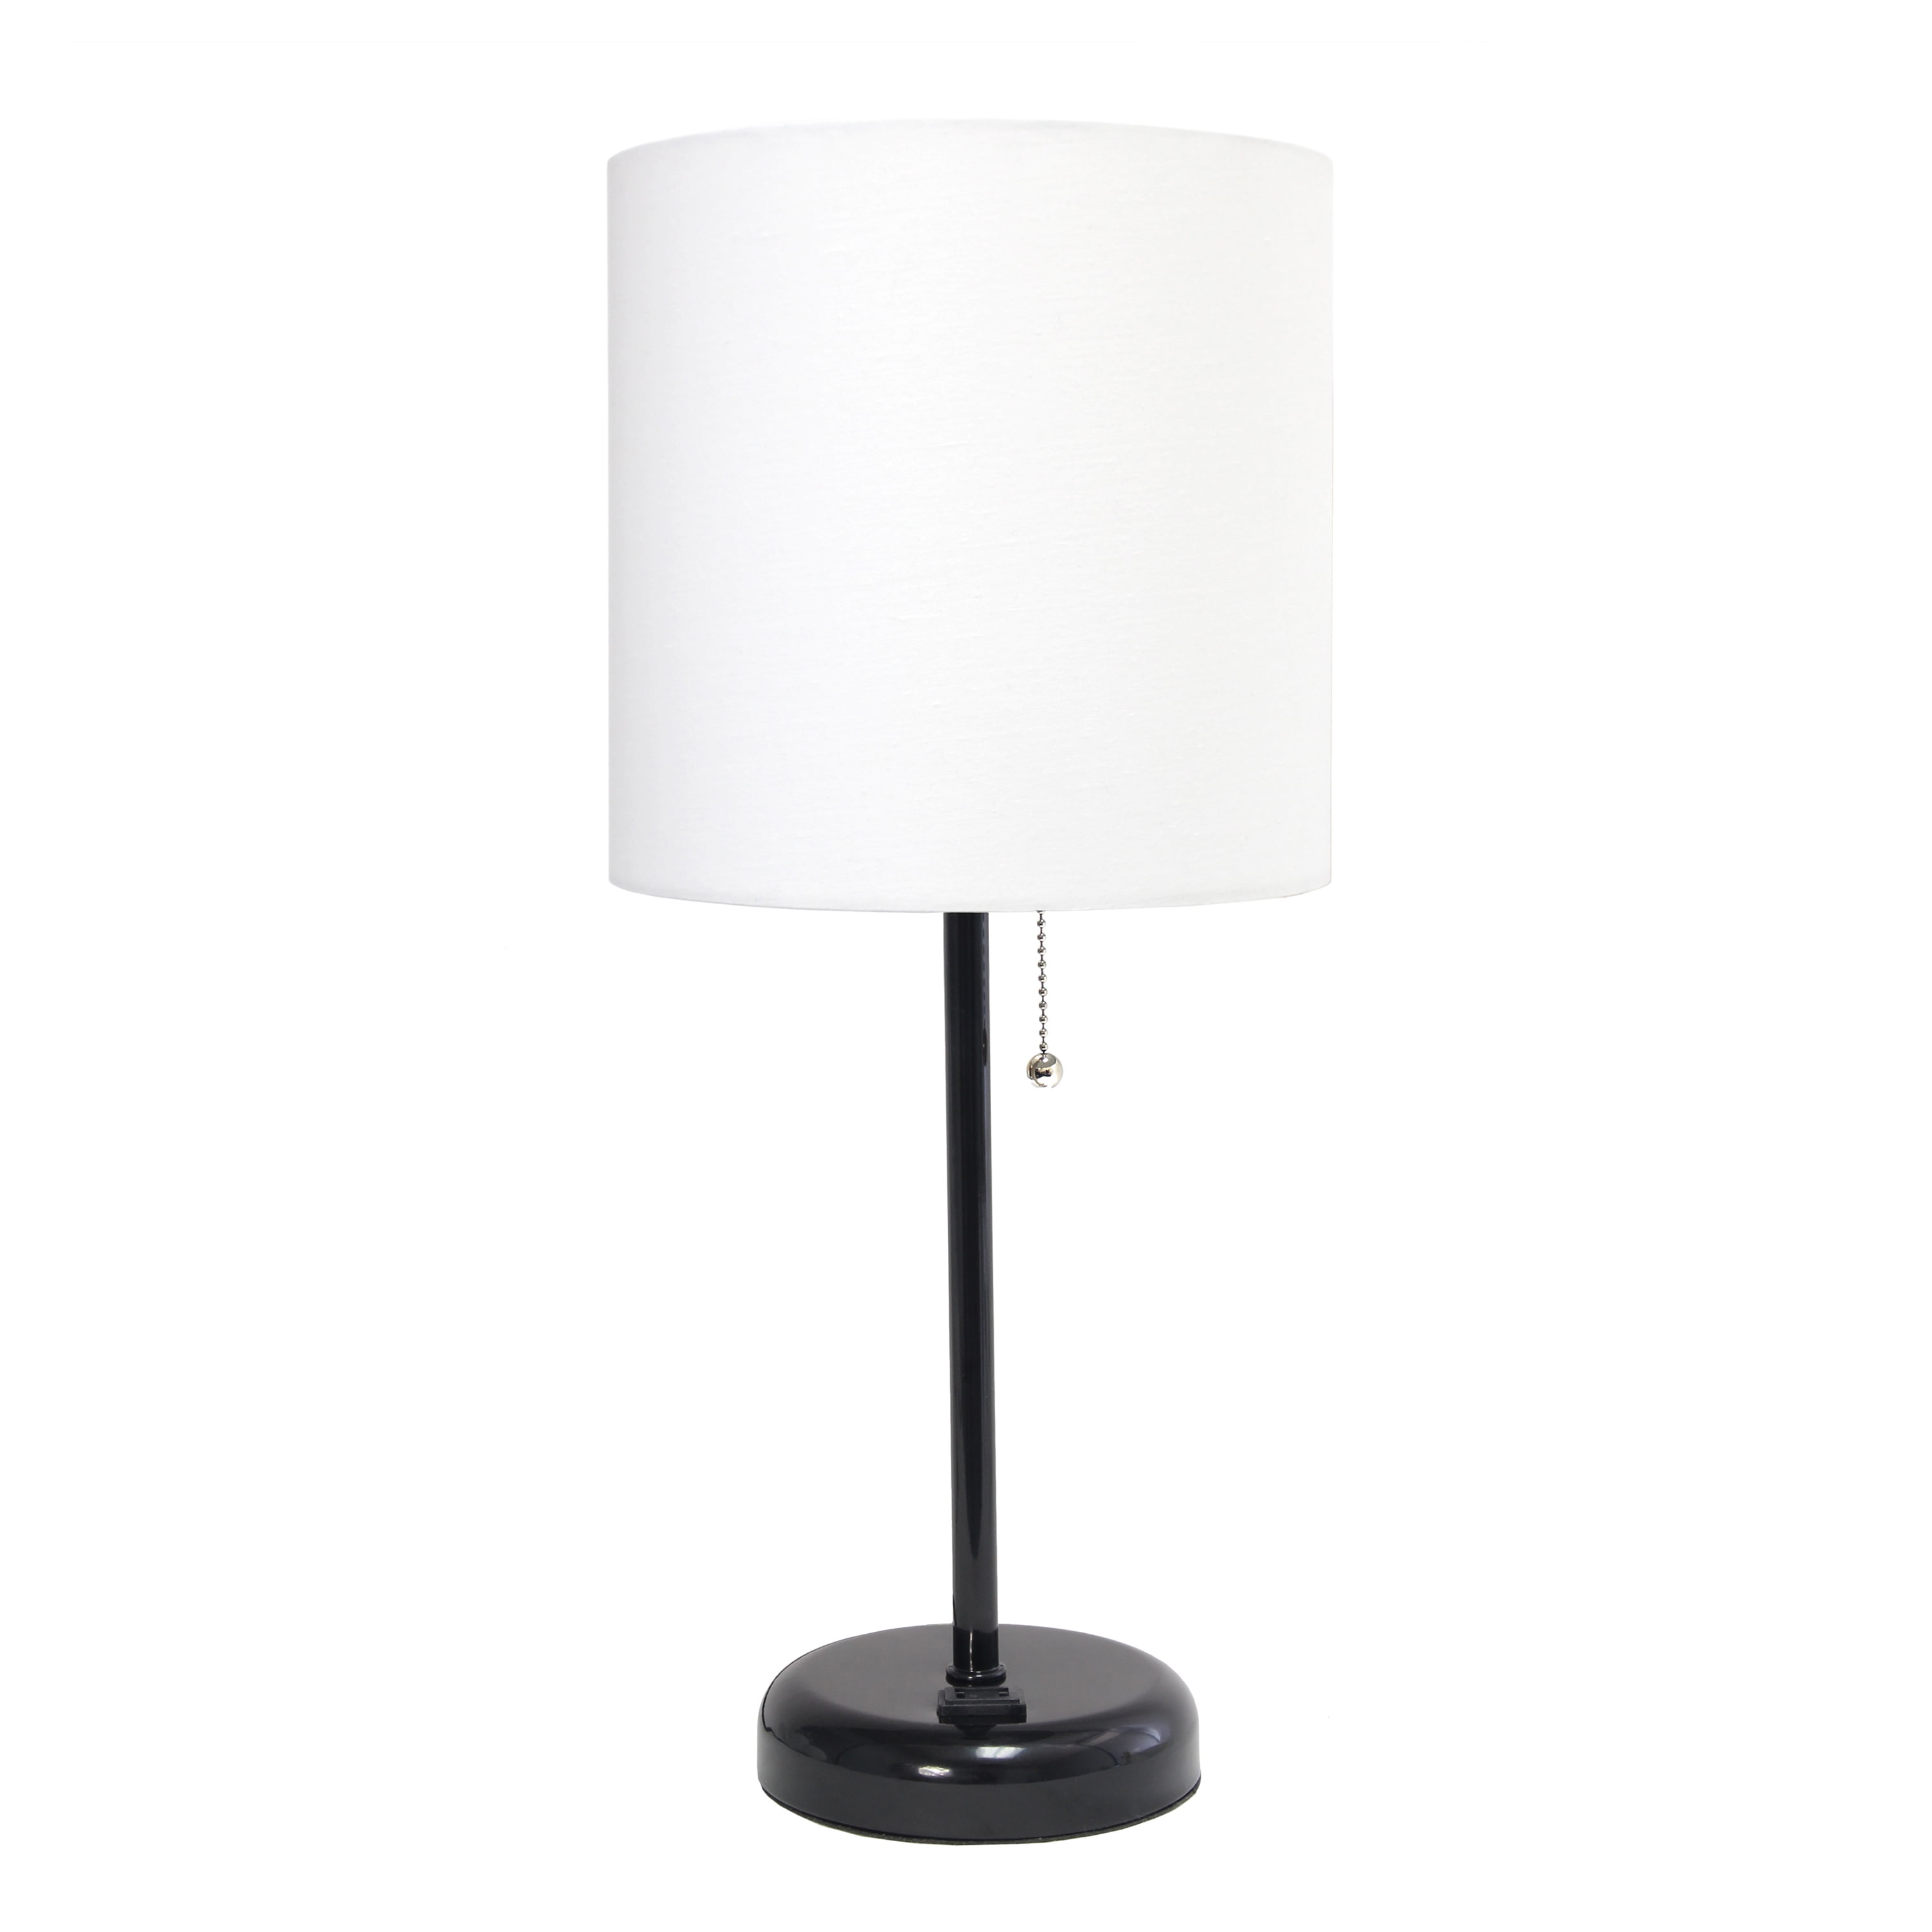 Lt2024-baw Black Stick Table Lamp With Charging Outlet & Fabric Shade, White